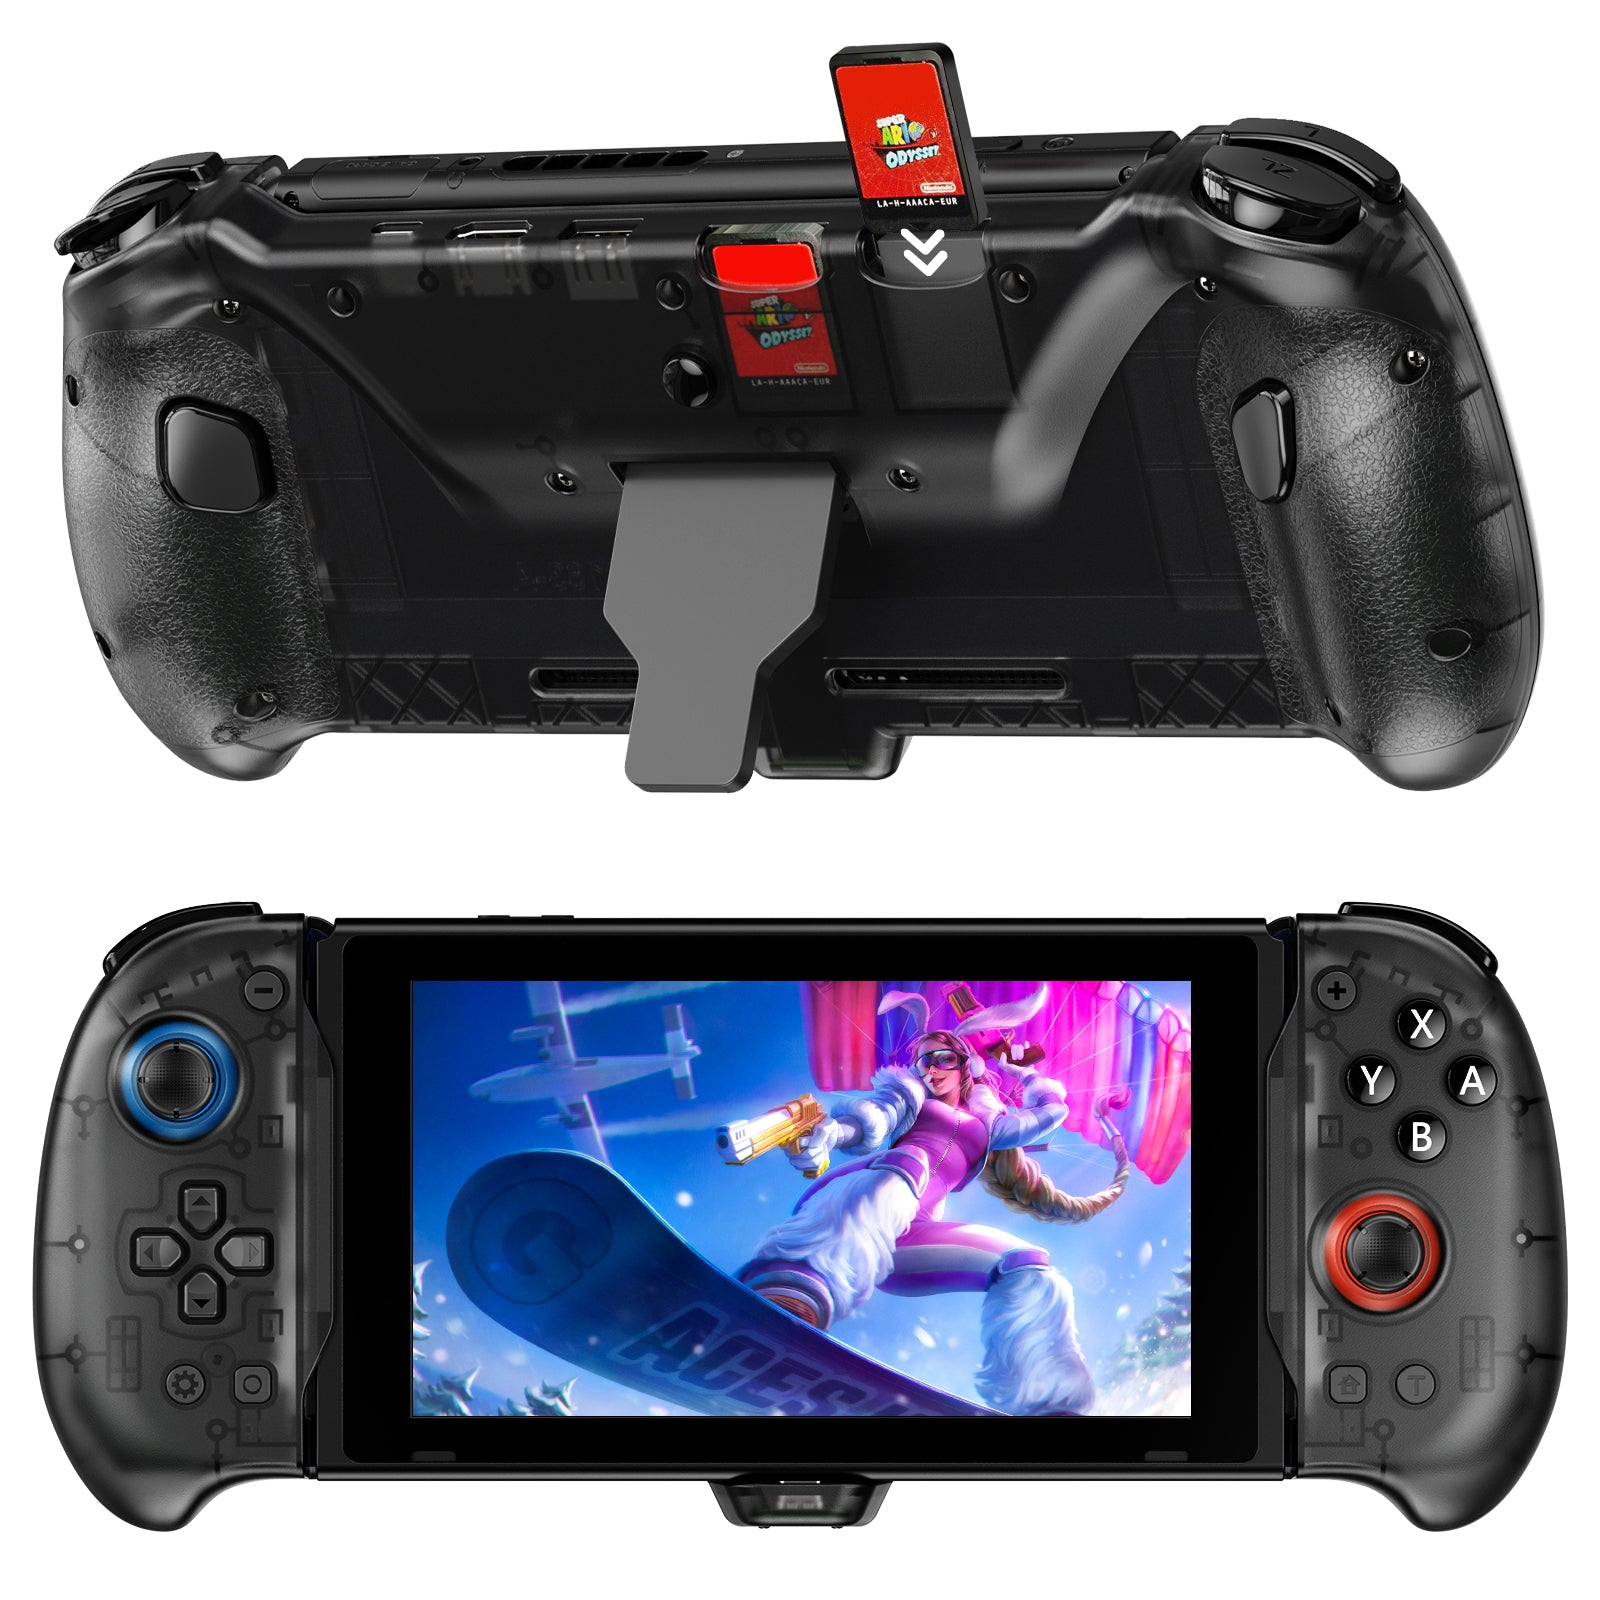 Black Switch GripCon controller with integrated HDMI port.